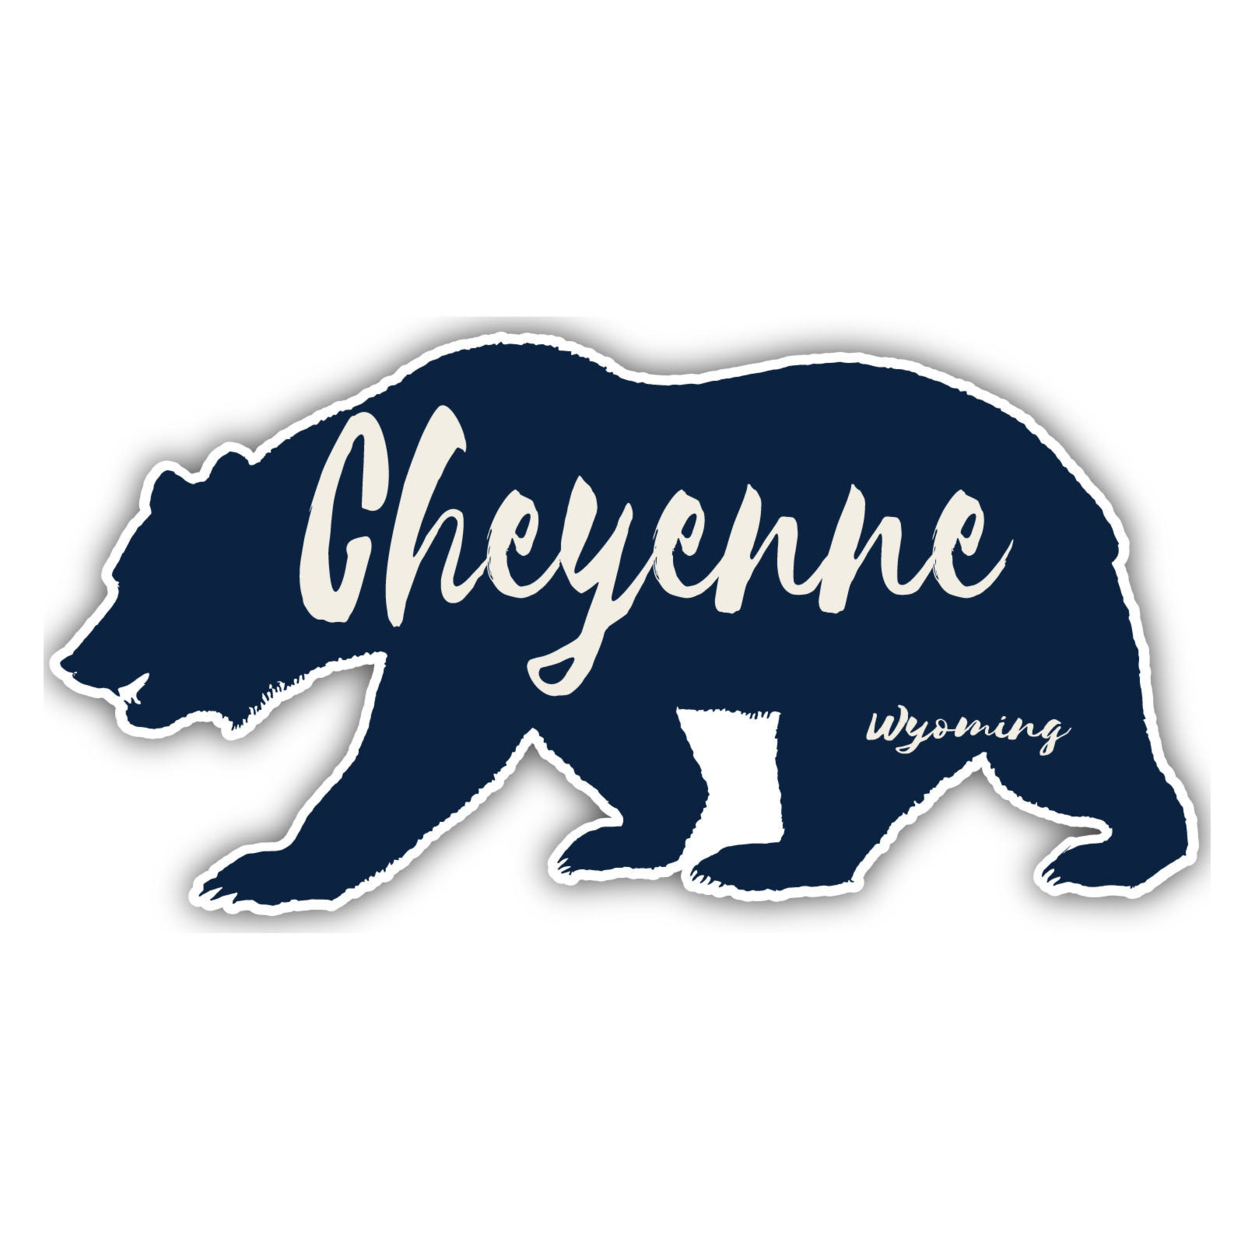 Cheyenne Wyoming Souvenir Decorative Stickers (Choose Theme And Size) - 4-Pack, 2-Inch, Bear